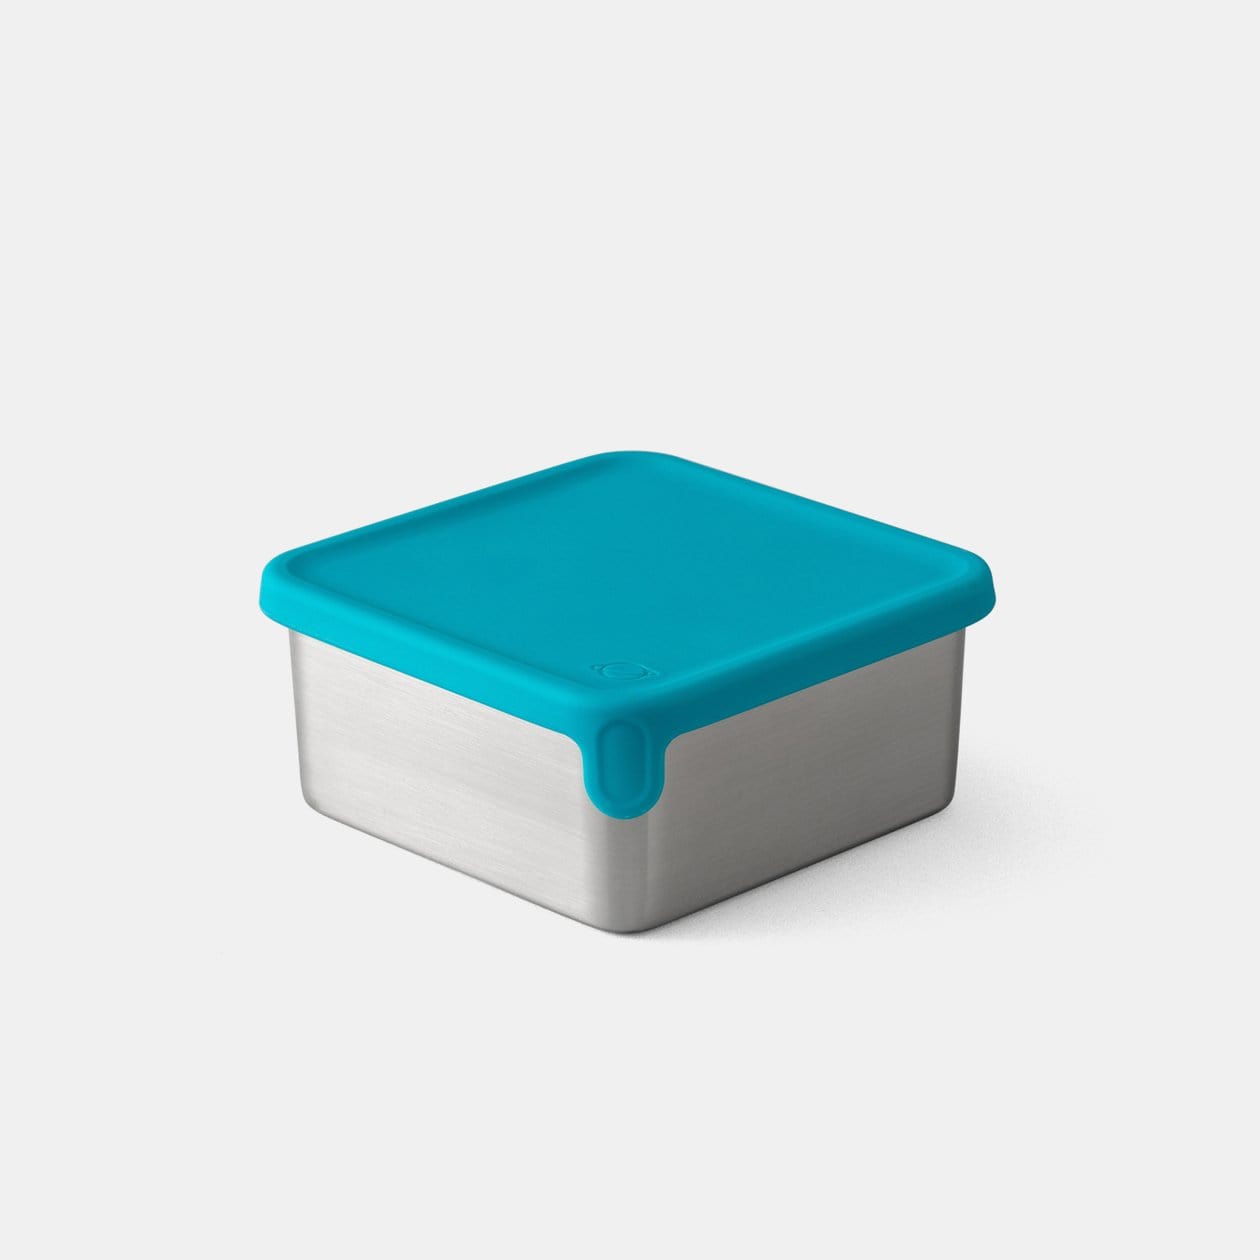 PlanetBox Shuttle Lunchbox